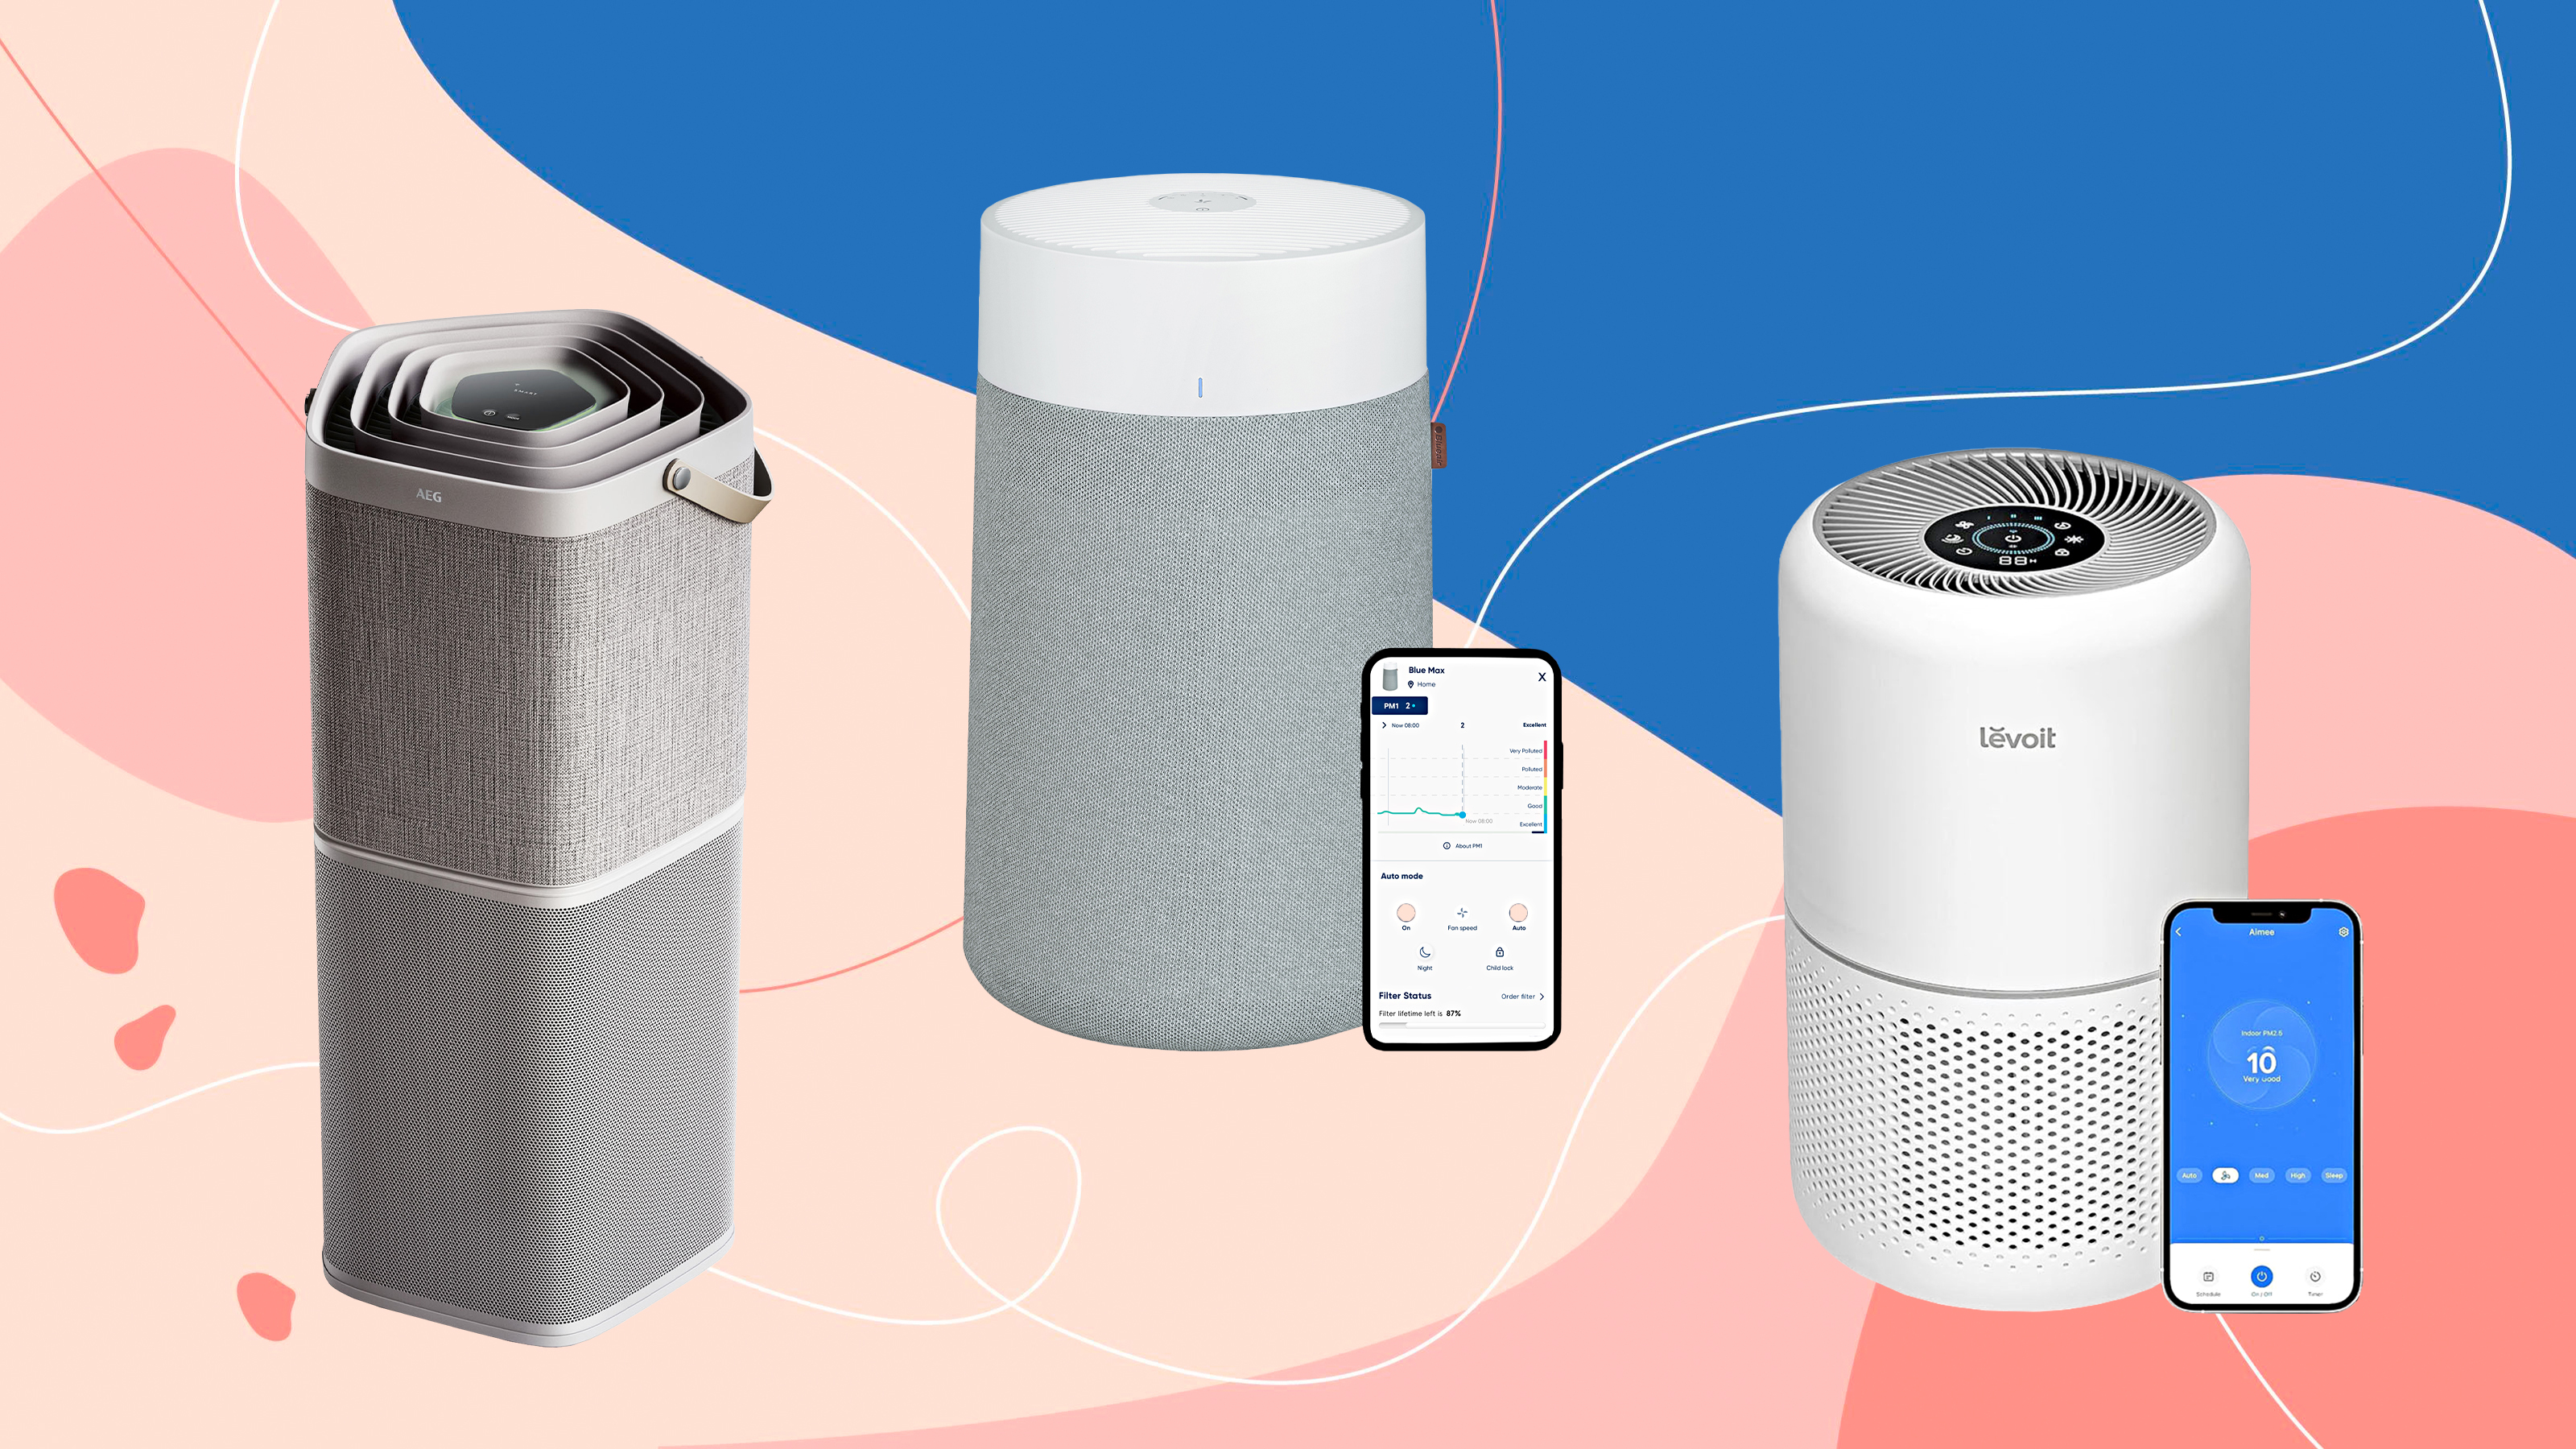  Xiaomi Air Purifiers for Home Bedroom, Allergen Removal, Smart  WiFi Alexa, Large Room Air Purifier Ultra Quiet Auto, PM2.5 Air Quality,  HEPA Filter Cleaner for Pets Hair, Odor, Dust, Smoke, 4Compact: Home &  Kitchen